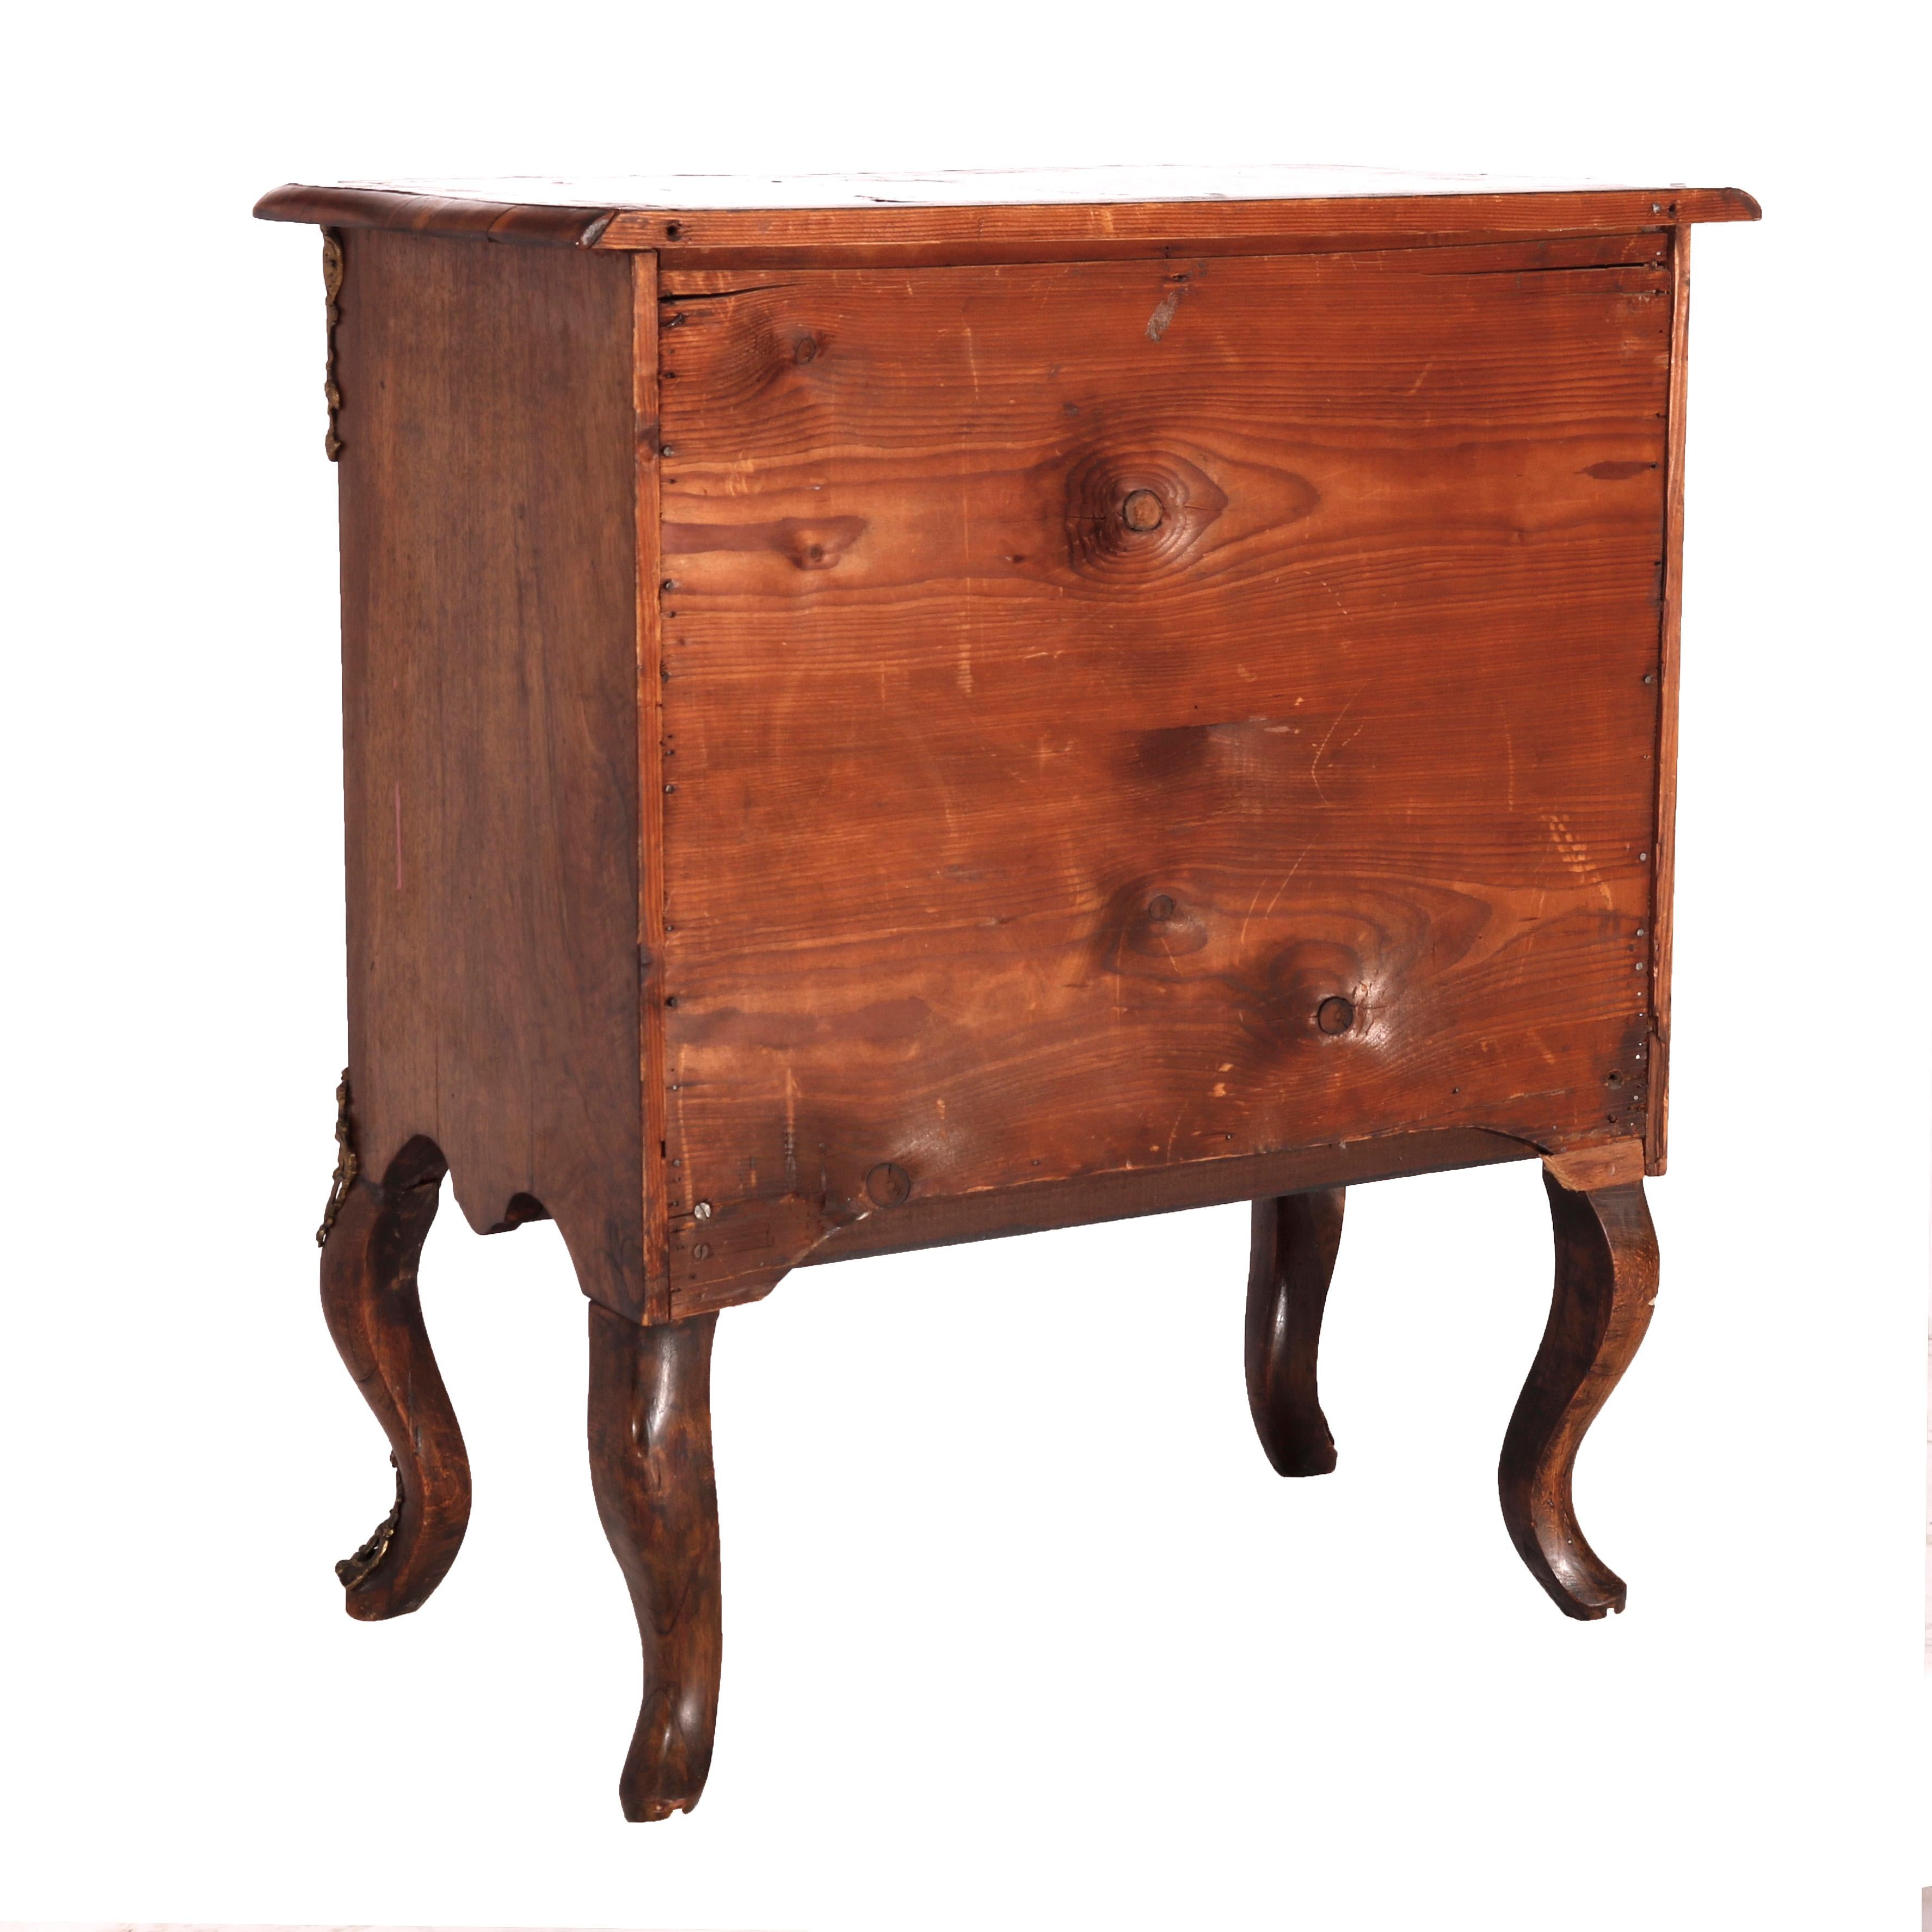  Antique Italian Kingwood, Satinwood & Burl Chest with Ormolu Mounts Late 18th C For Sale 3